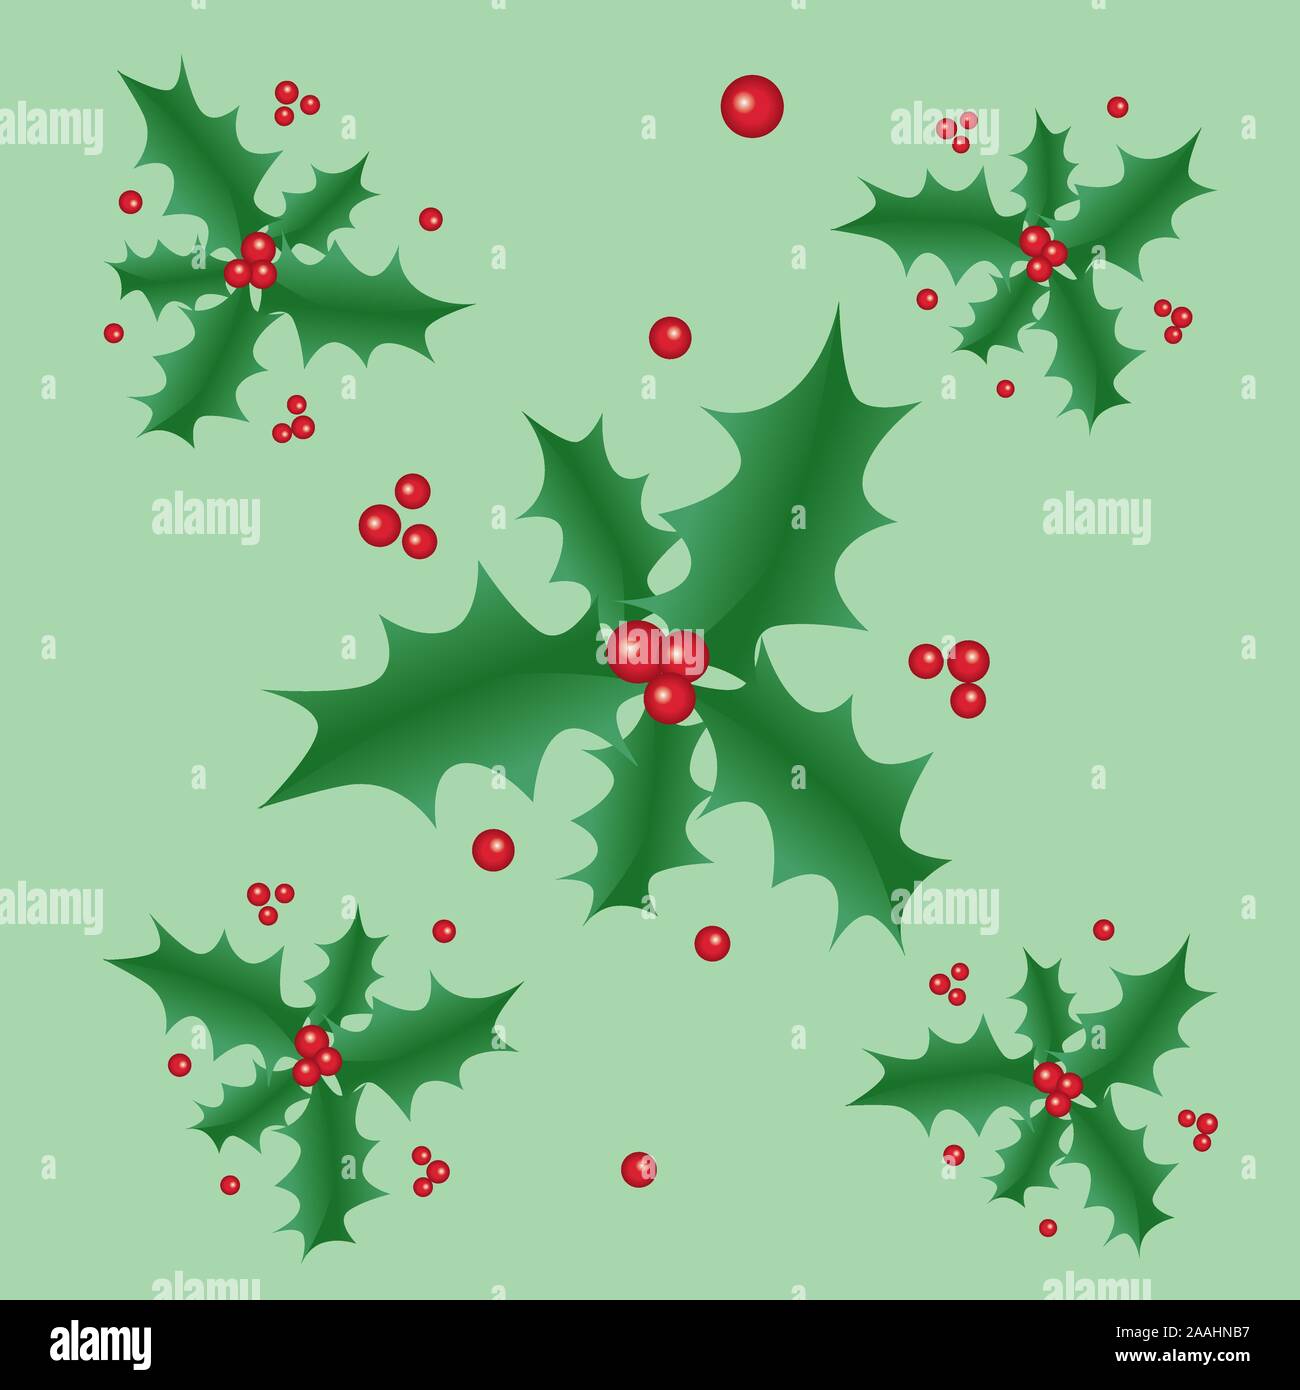 A Christmas style pattern of holly leafs and red berries on a green background Stock Vector